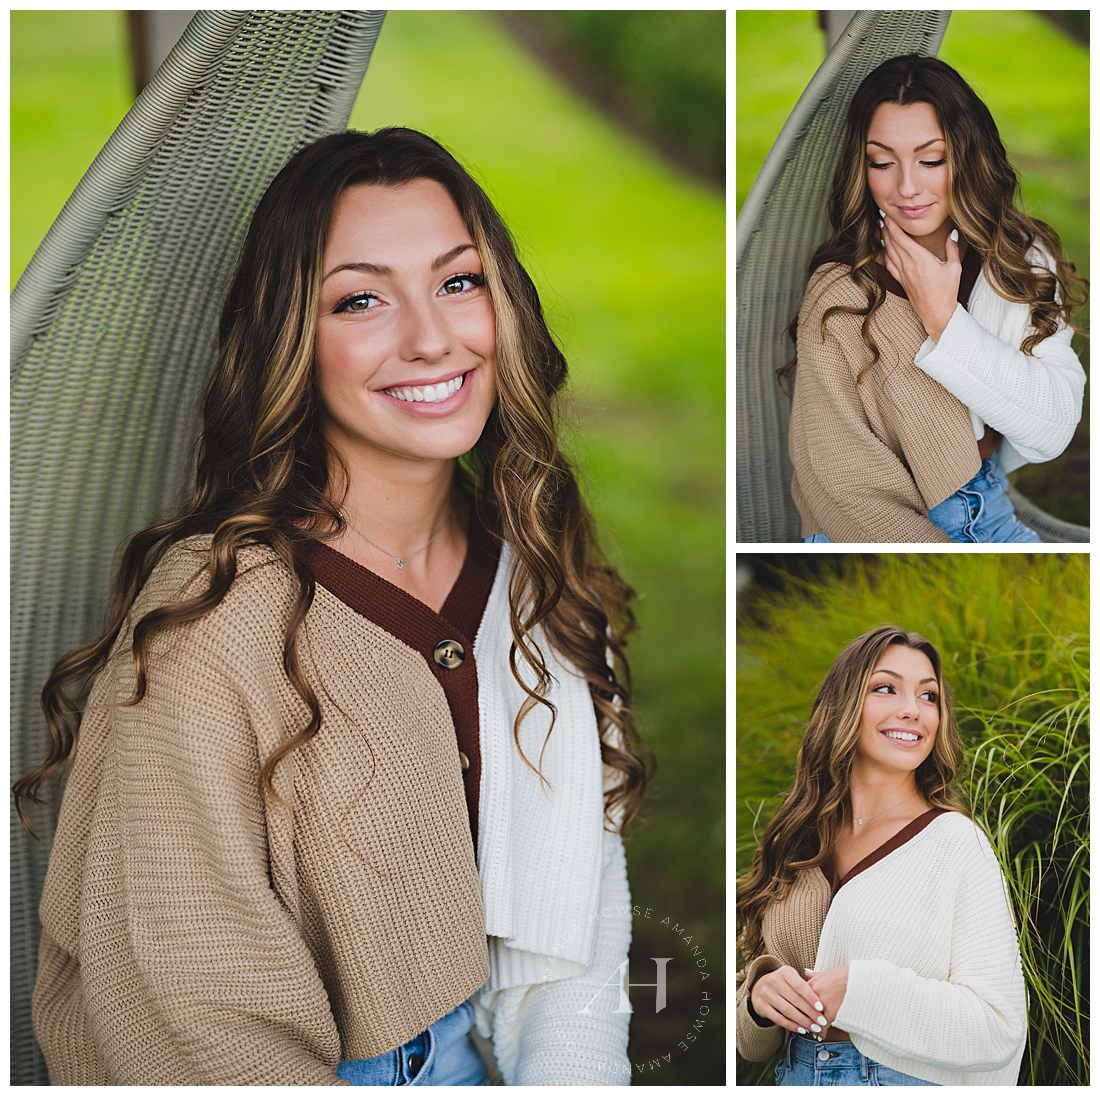 Mid-October Senior Portraits on Outdoor Chair Swing | Tri-Toned Neutral Sweater with Jeans, Cute Senior Girl Fit Ideas | Photographed by the Best Tacoma, Washington Senior Photographer Amanda Howse Photography